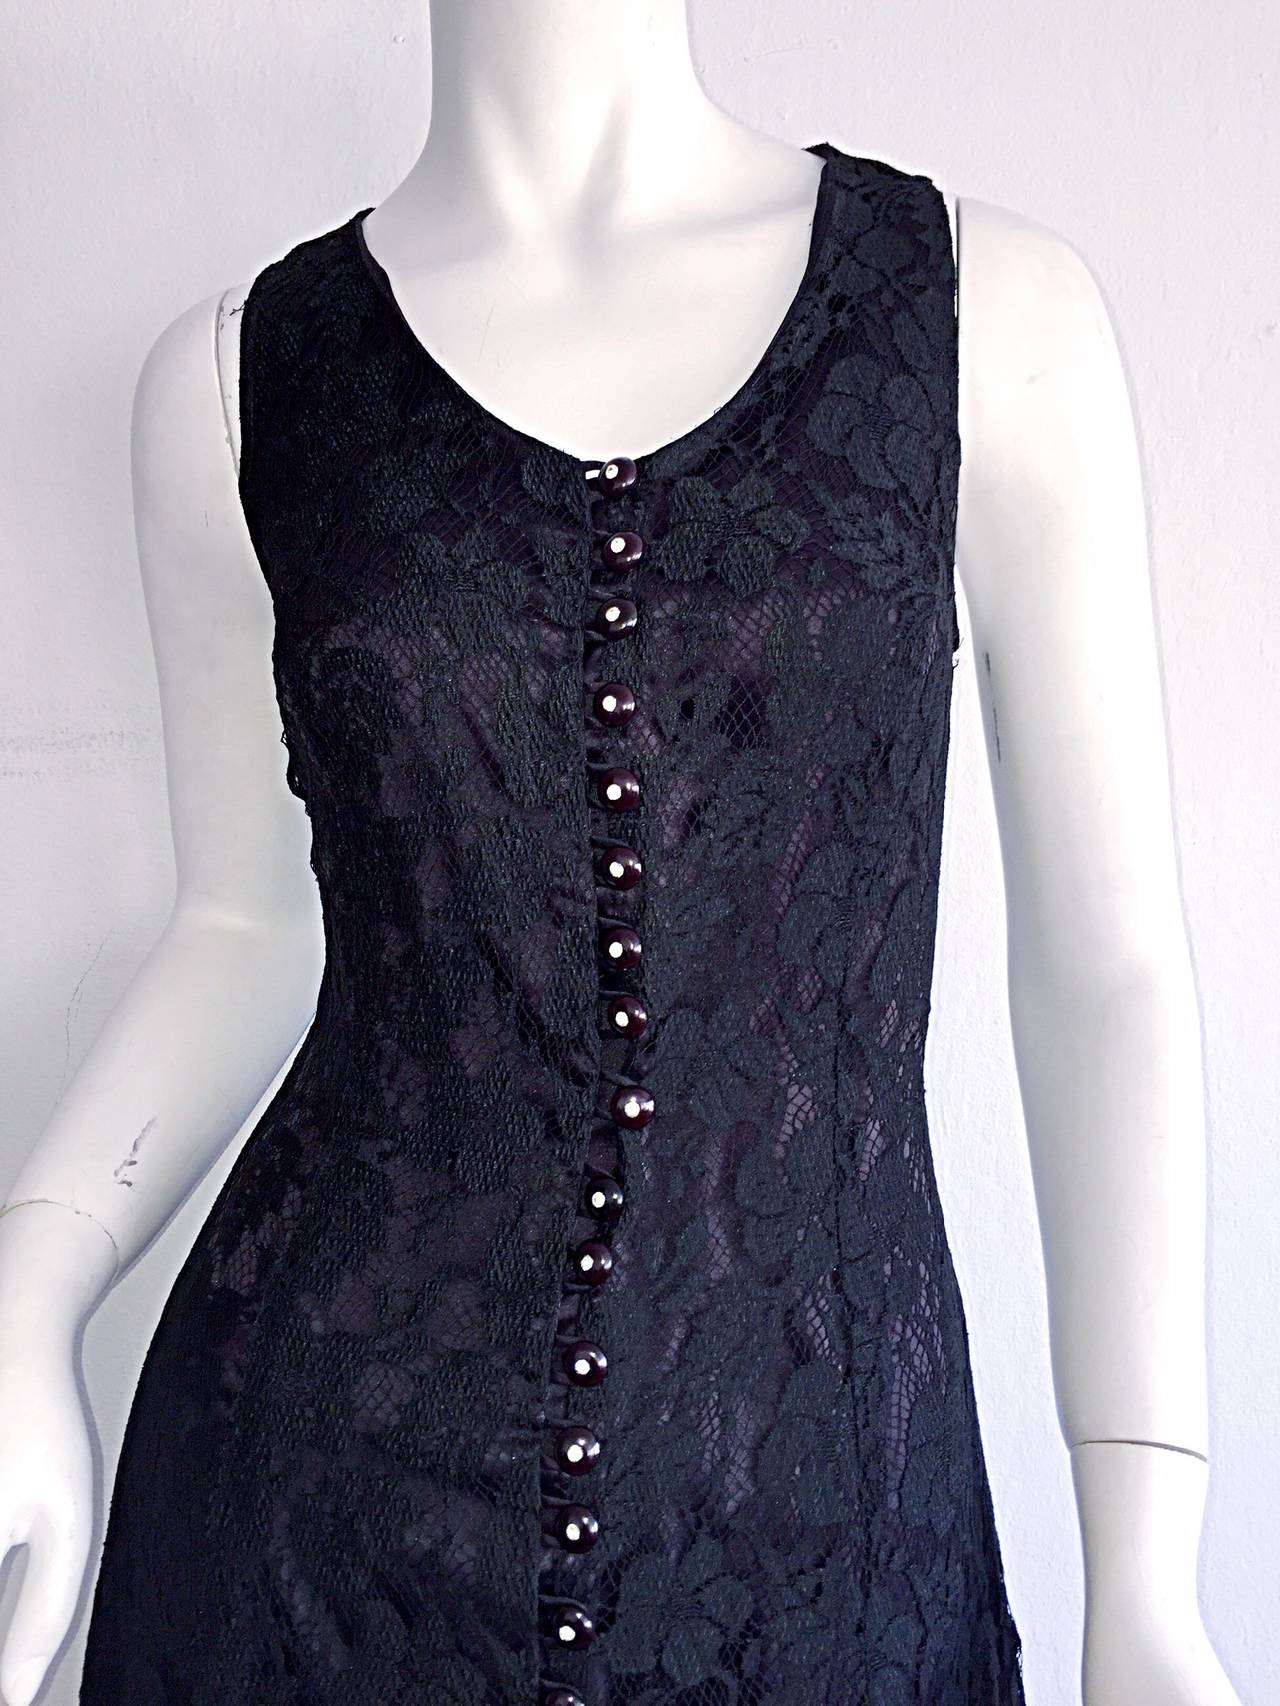 Paco Rabbane 1990s Black Lace Babydoll Dressw/ Rhinestone Buttons In Excellent Condition For Sale In San Diego, CA